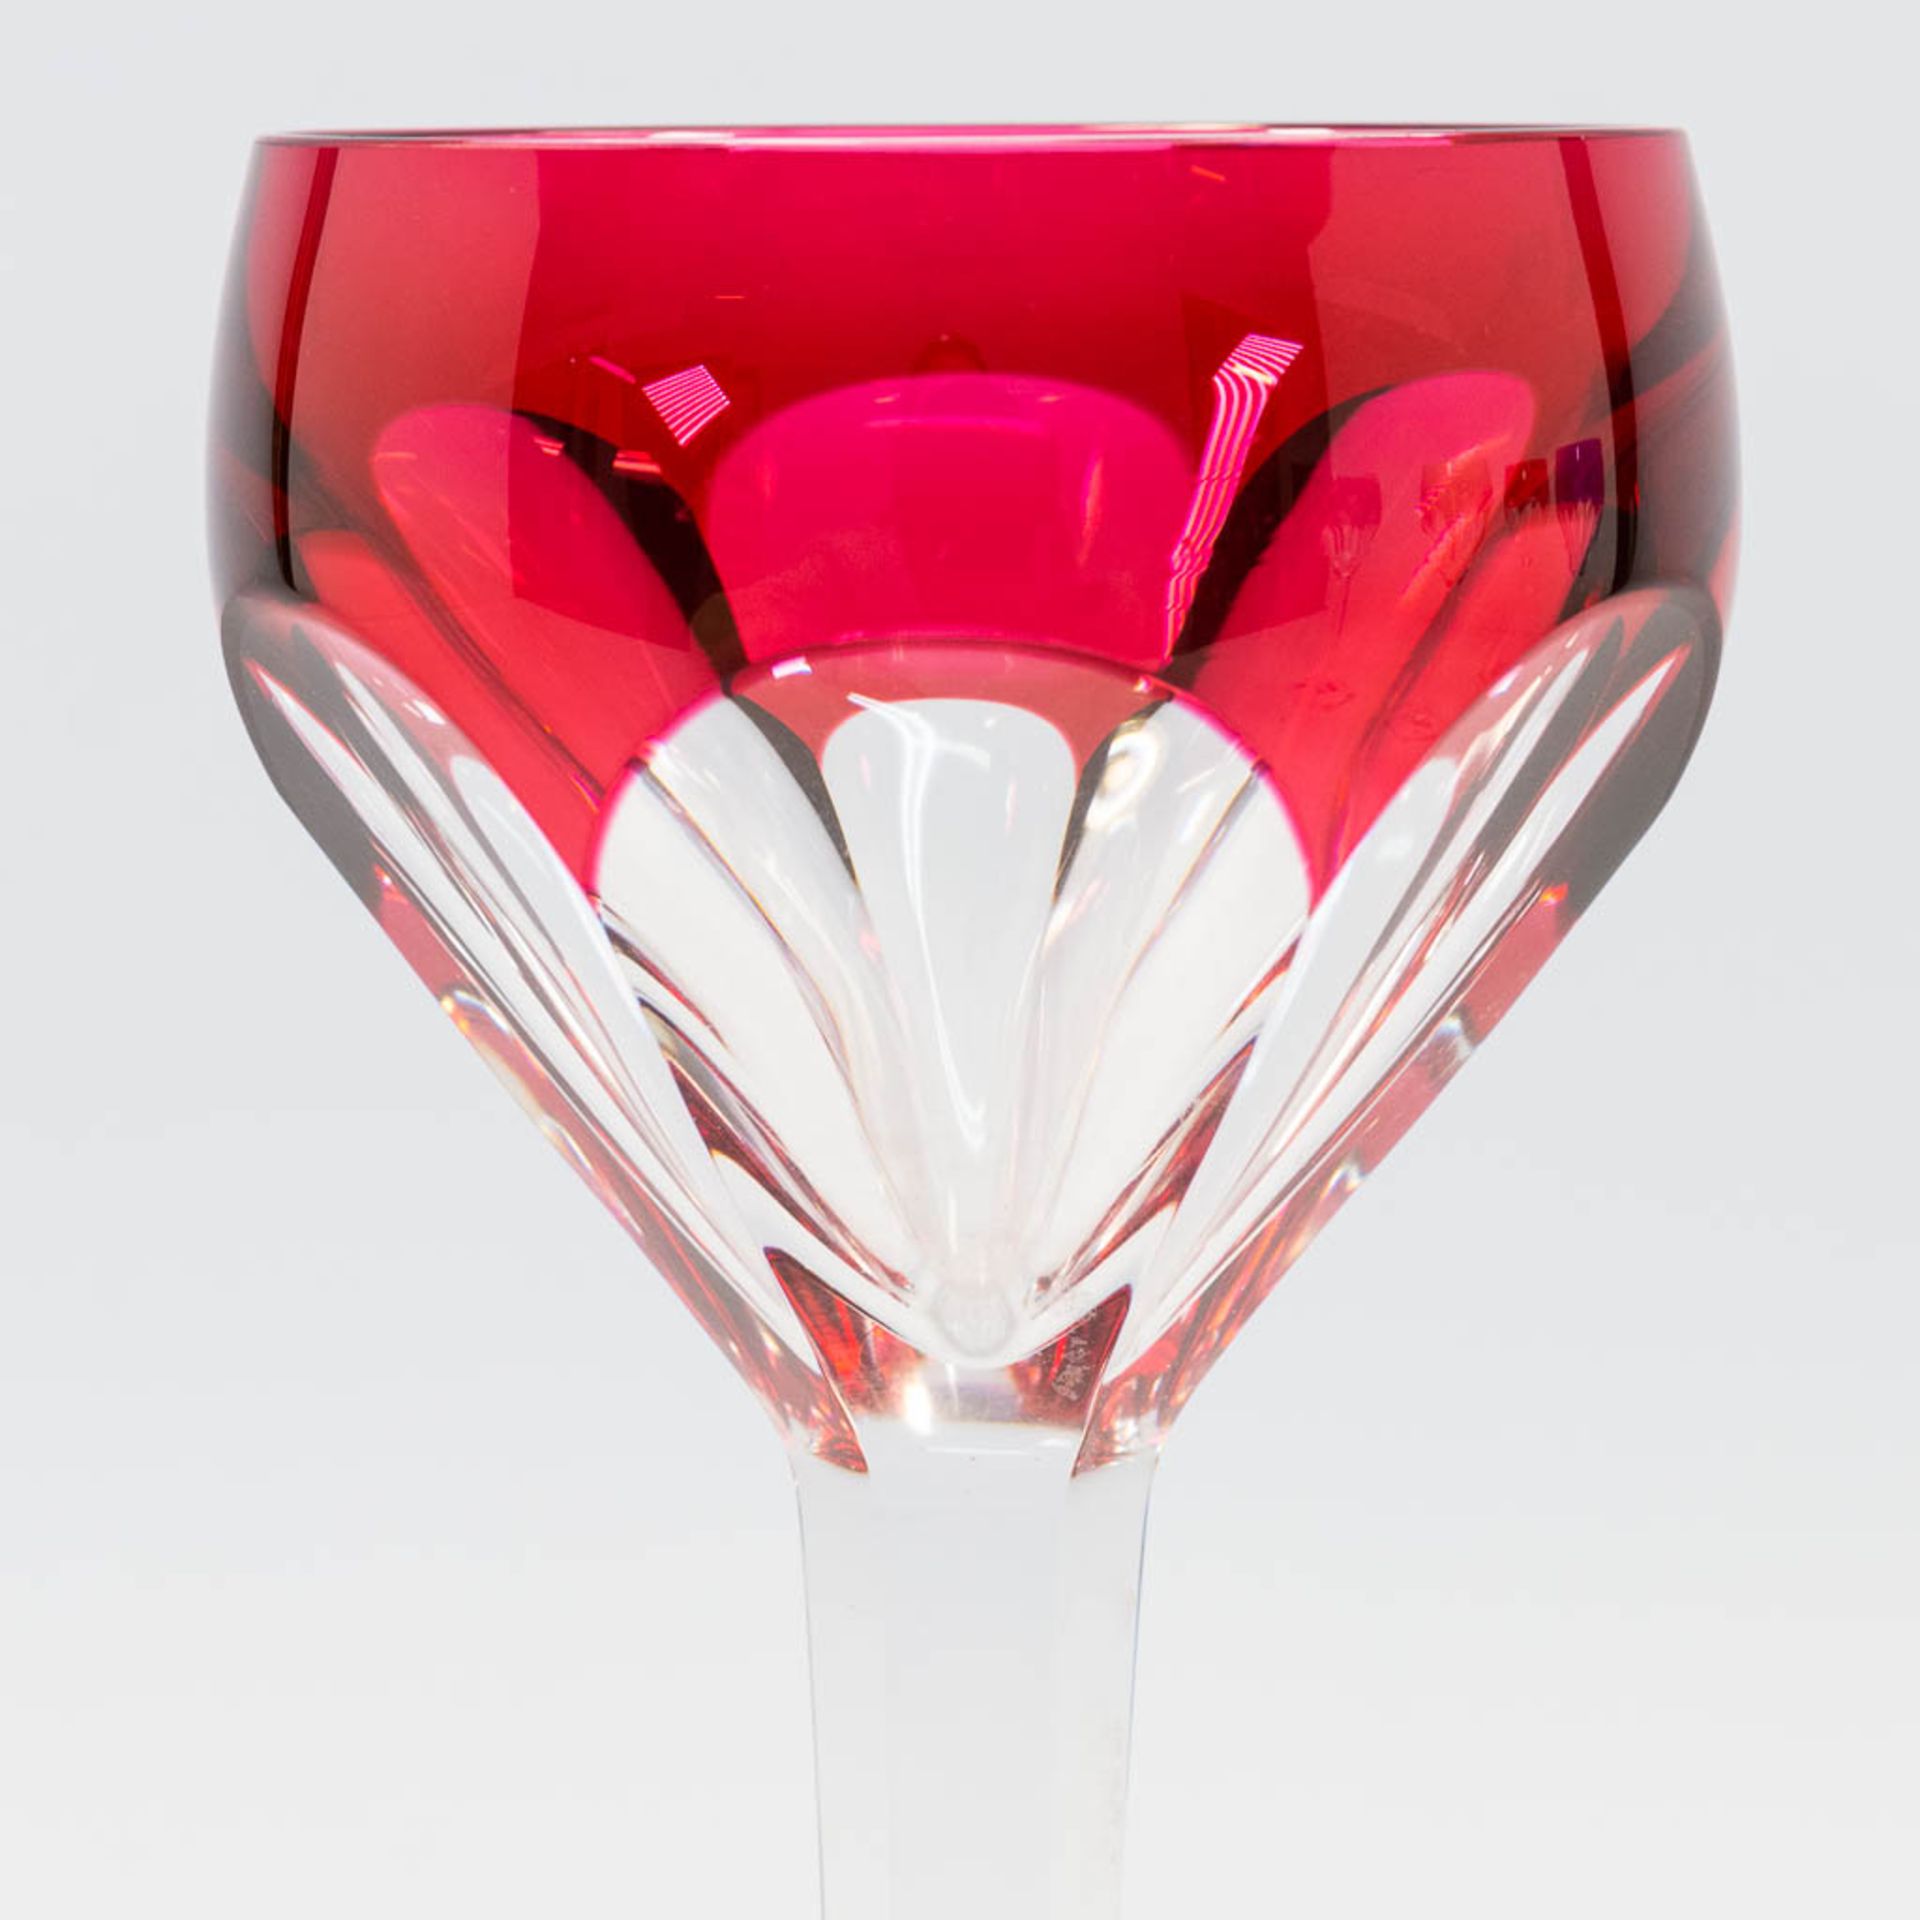 A collection of 5 cut crystal glasses in bright colours, made by Val Saint Lambert. (19 x 8 cm) - Image 7 of 12